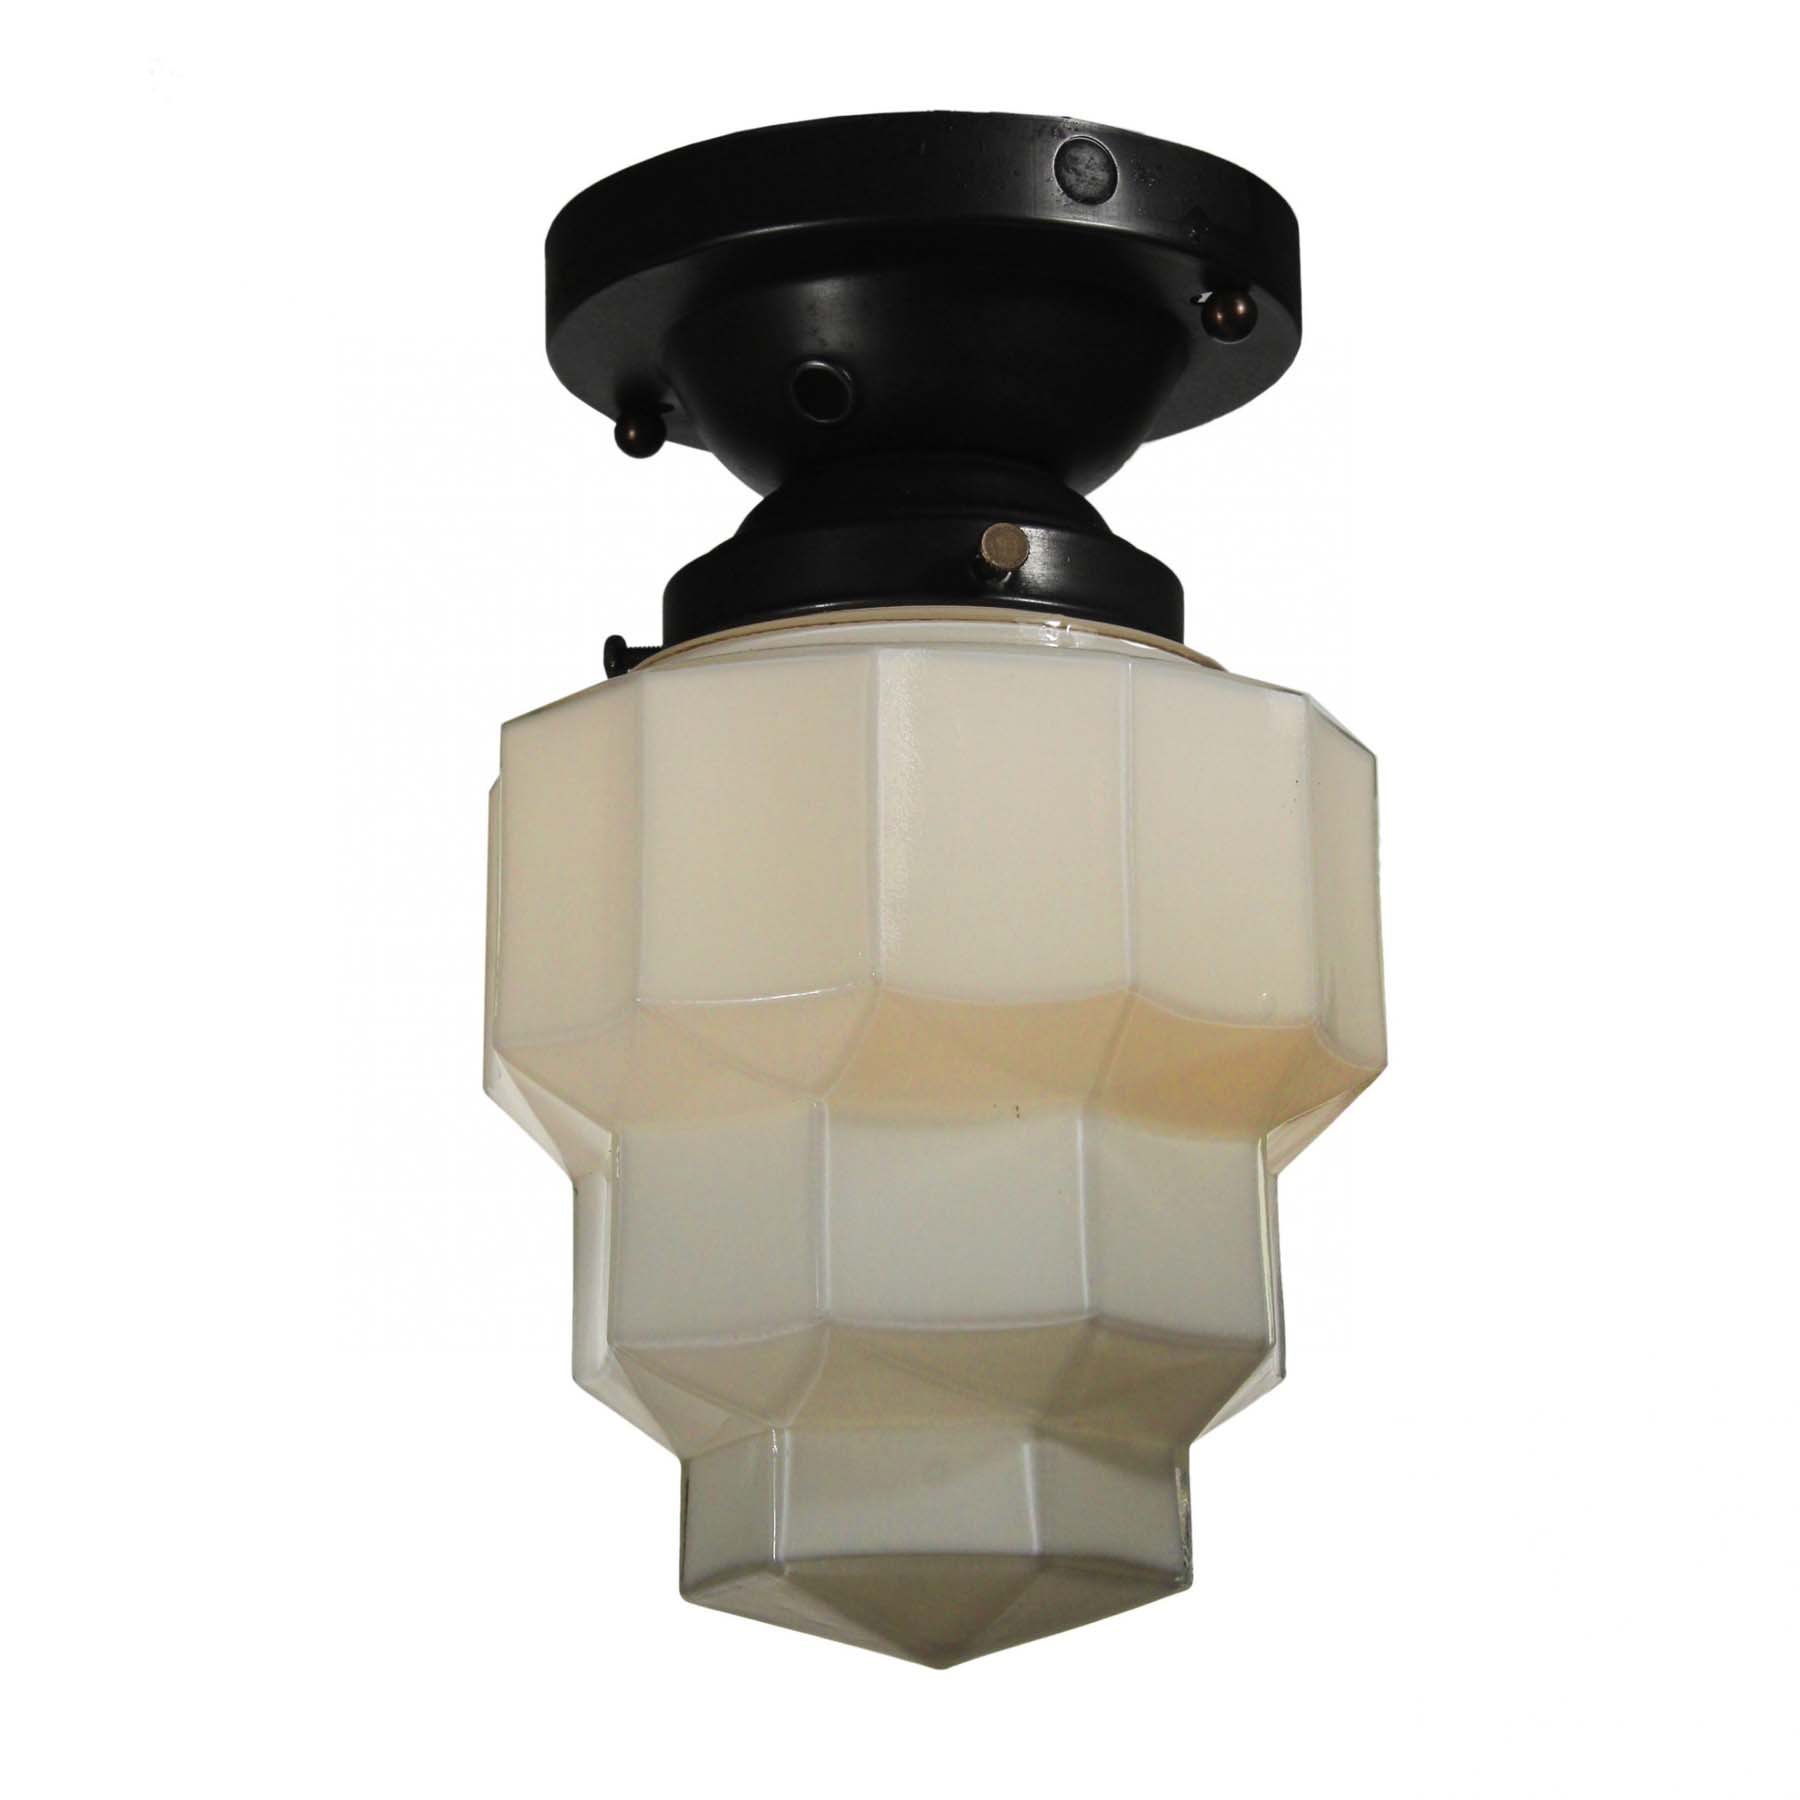 SOLD Art Deco Flush Mount with Flash Glass Shade, Antique Lighting-0